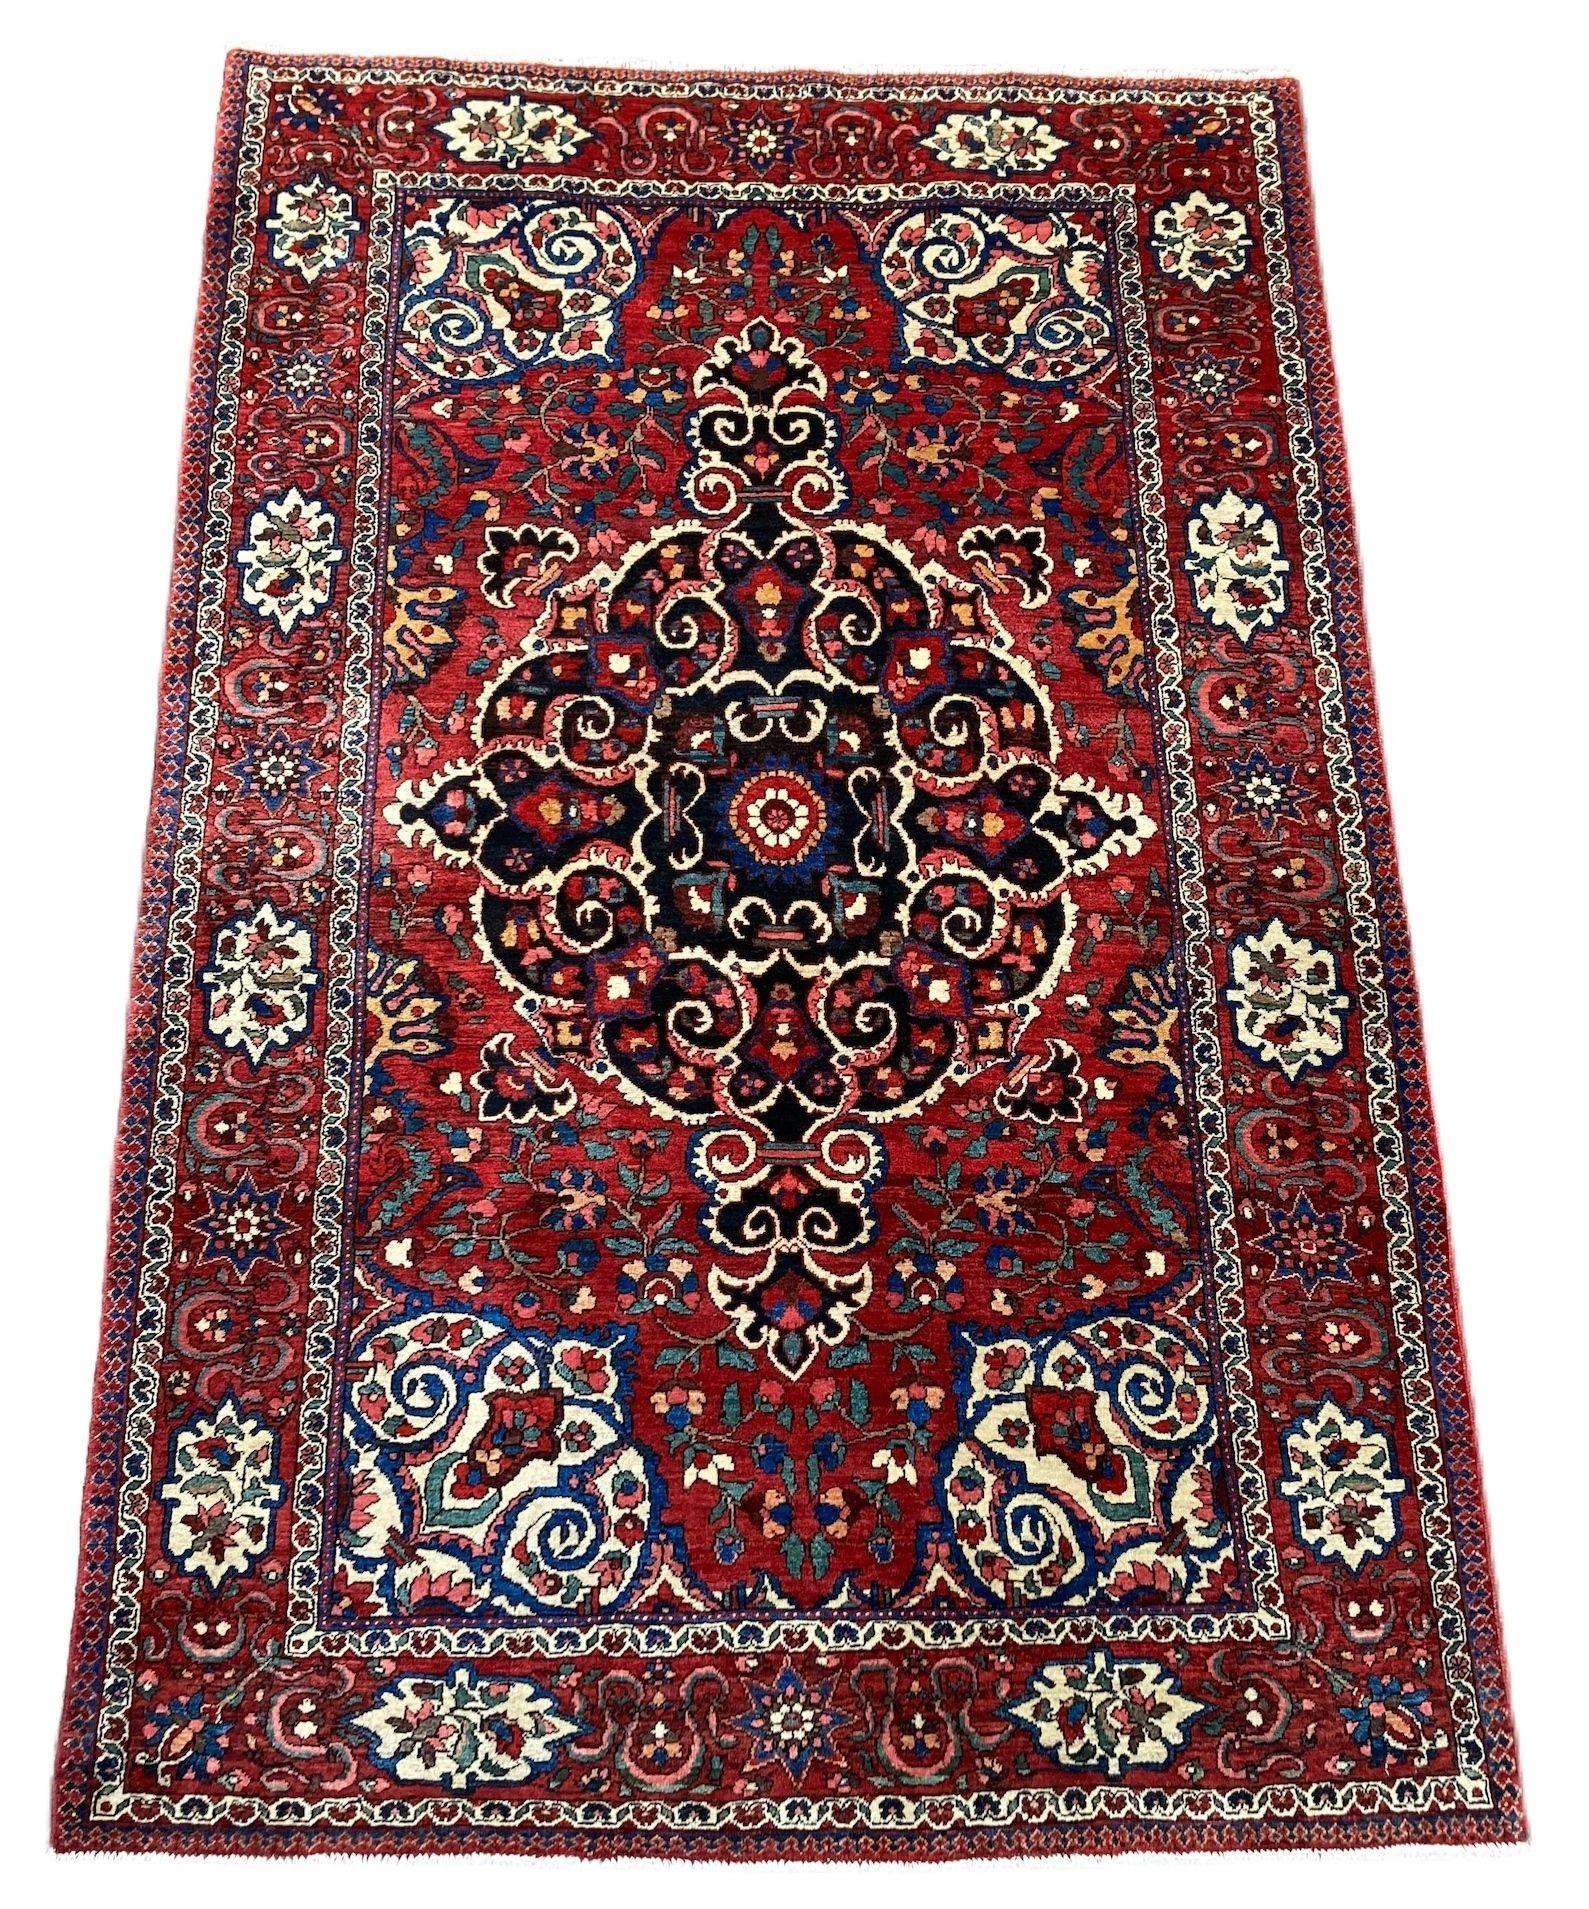 A beautiful antique Bakhtiar rug, hand woven circa 1920 with a single medallion floral design on a terracotta red field and cartouche border. Wonderful secondary colours of blues, pinks and gold and a highly decorative antique rug.
Size: 2.11m x